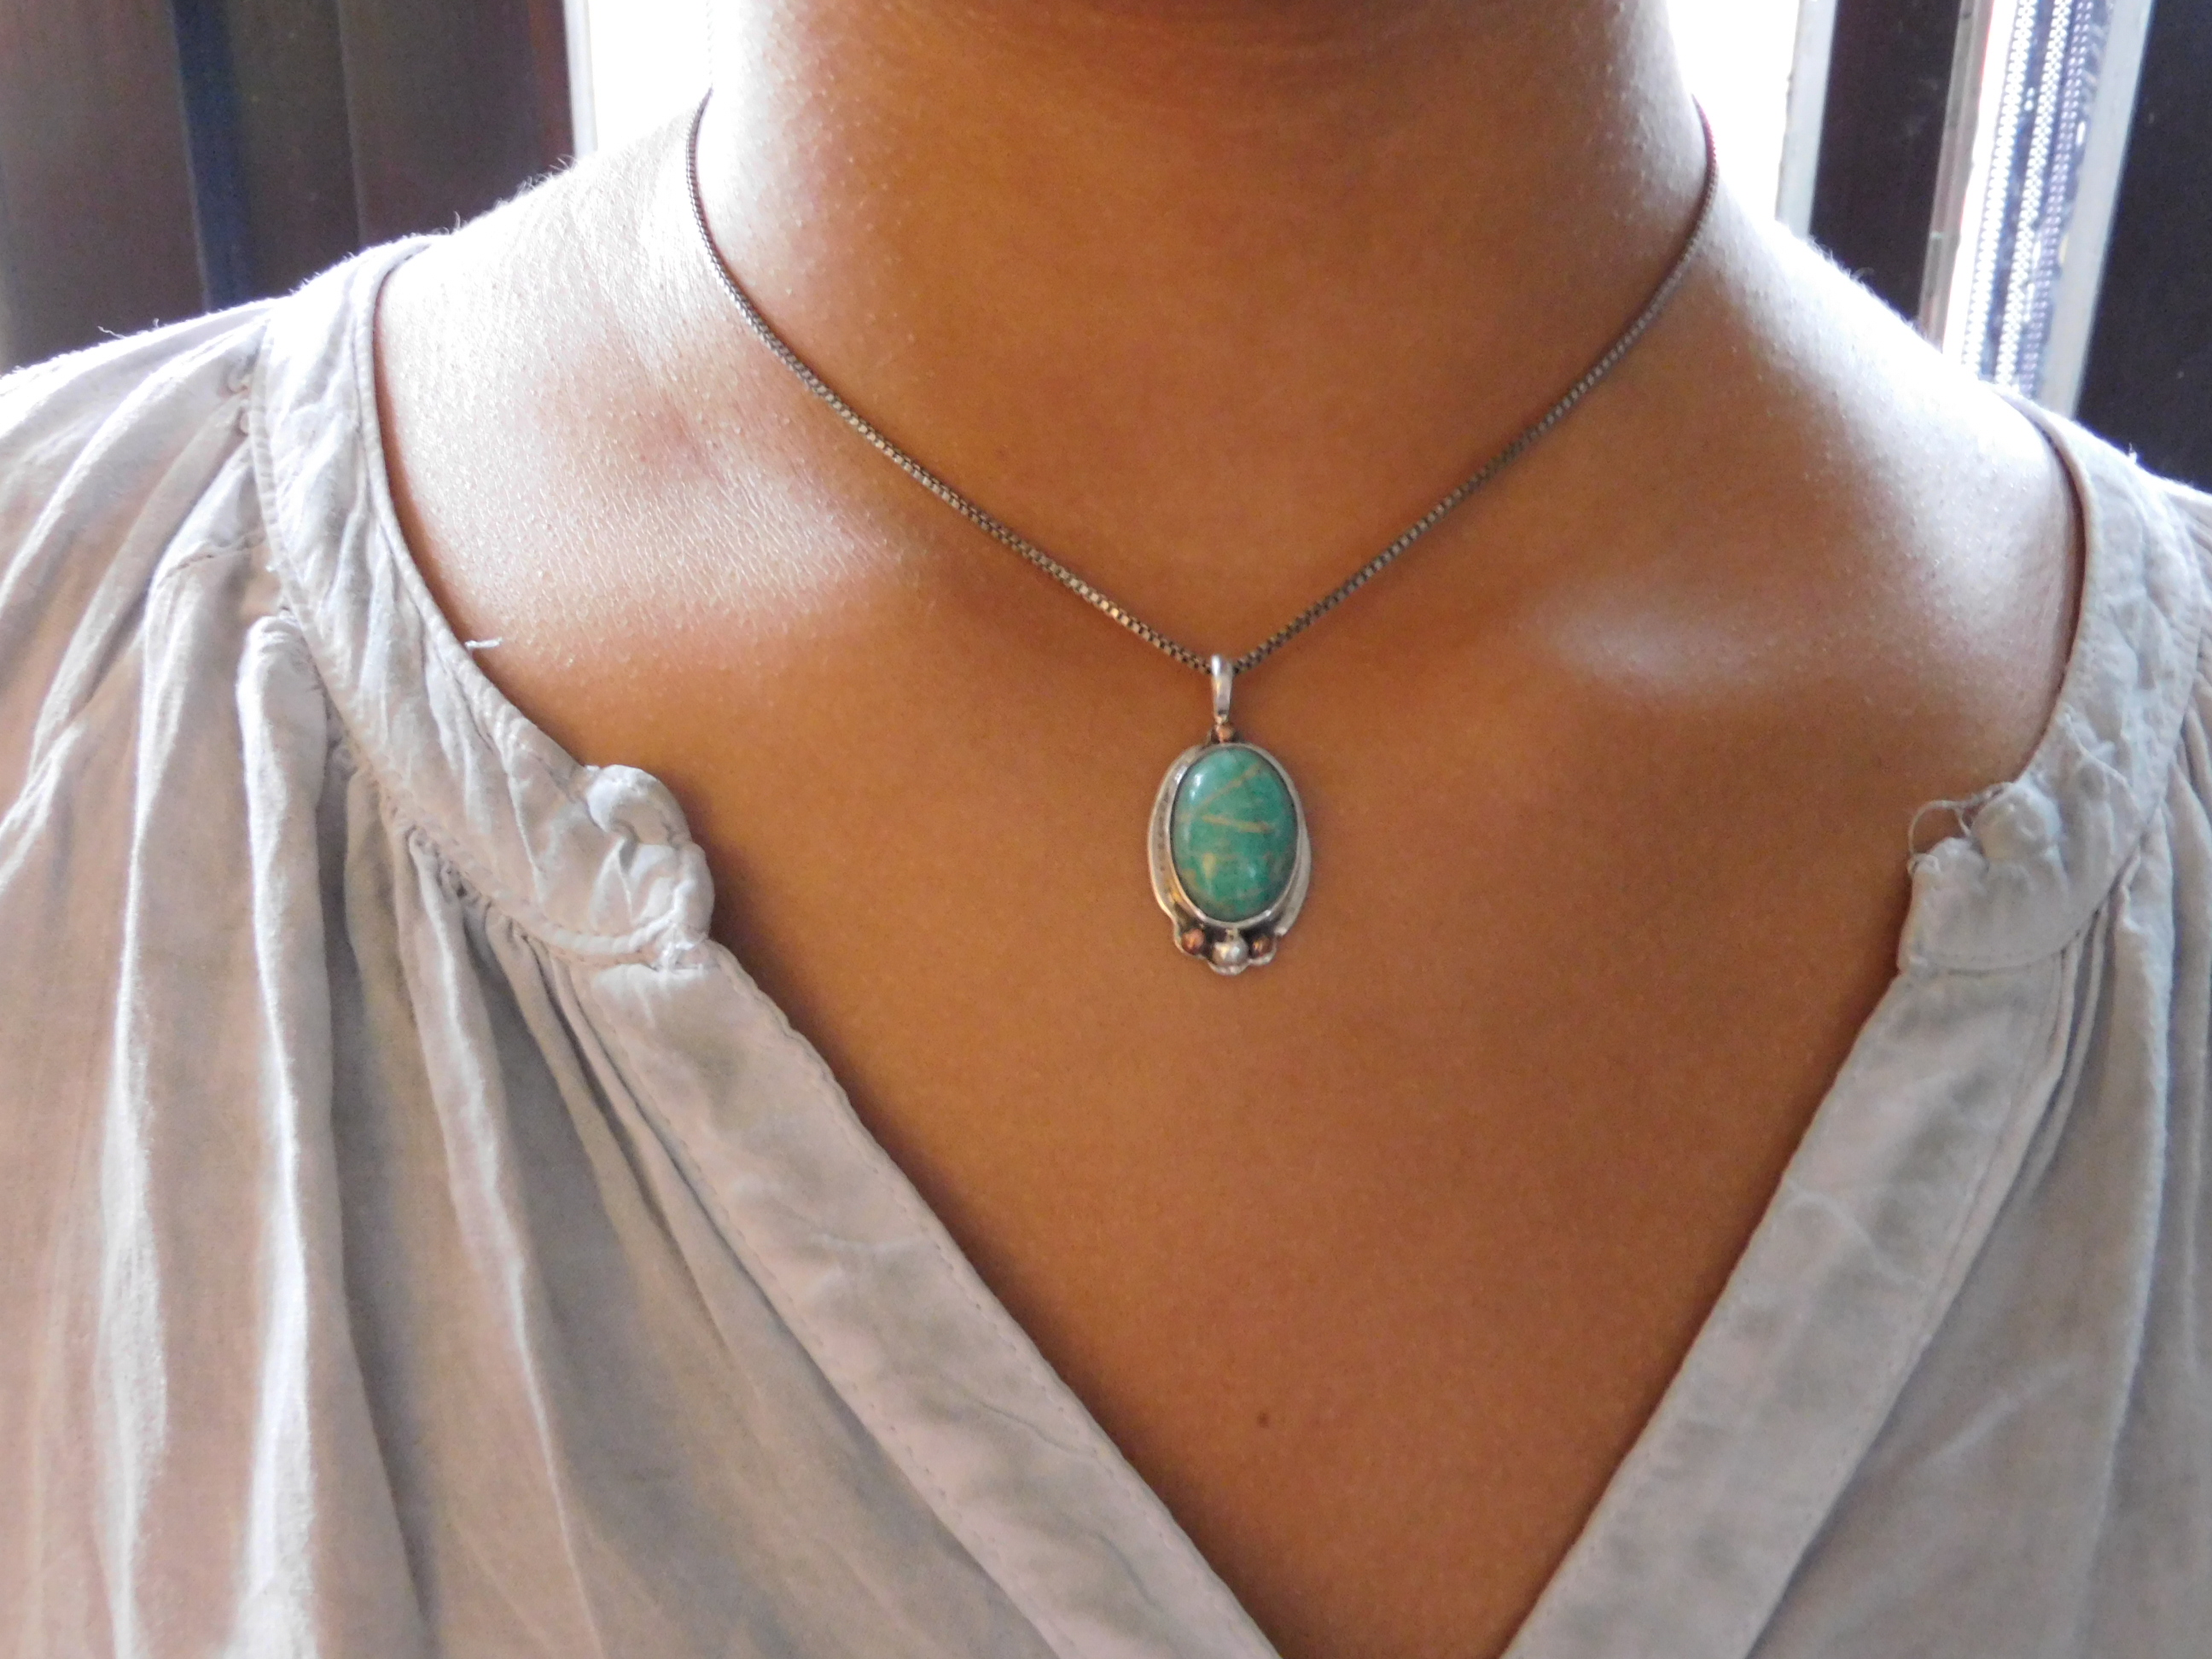 Pendant with amazonite stone set in sterling silver and copper